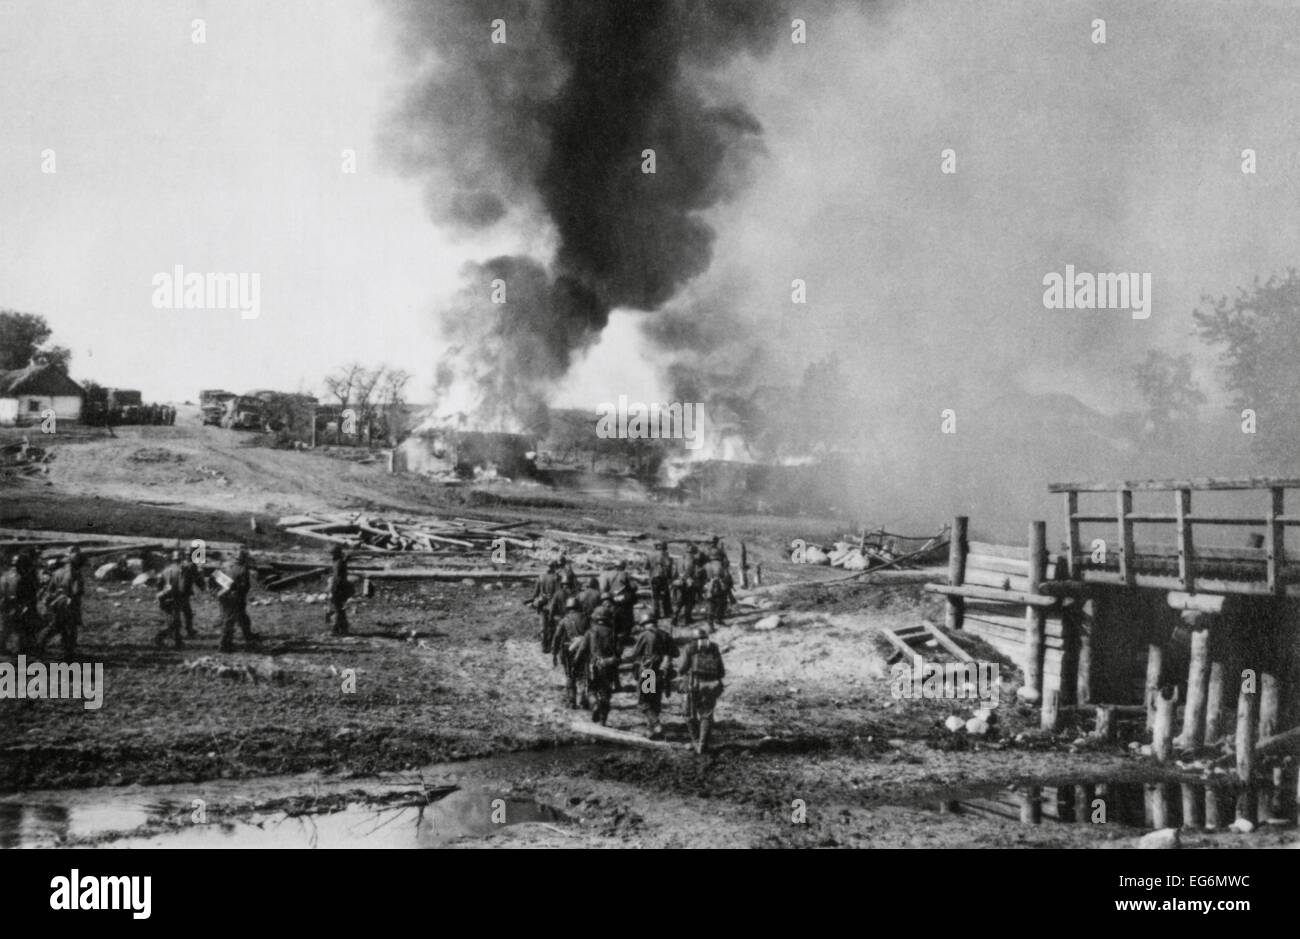 German infantry advancing on a burning village in the Soviet Union (Russia). Summer of 1941, during World War 2. Stock Photo